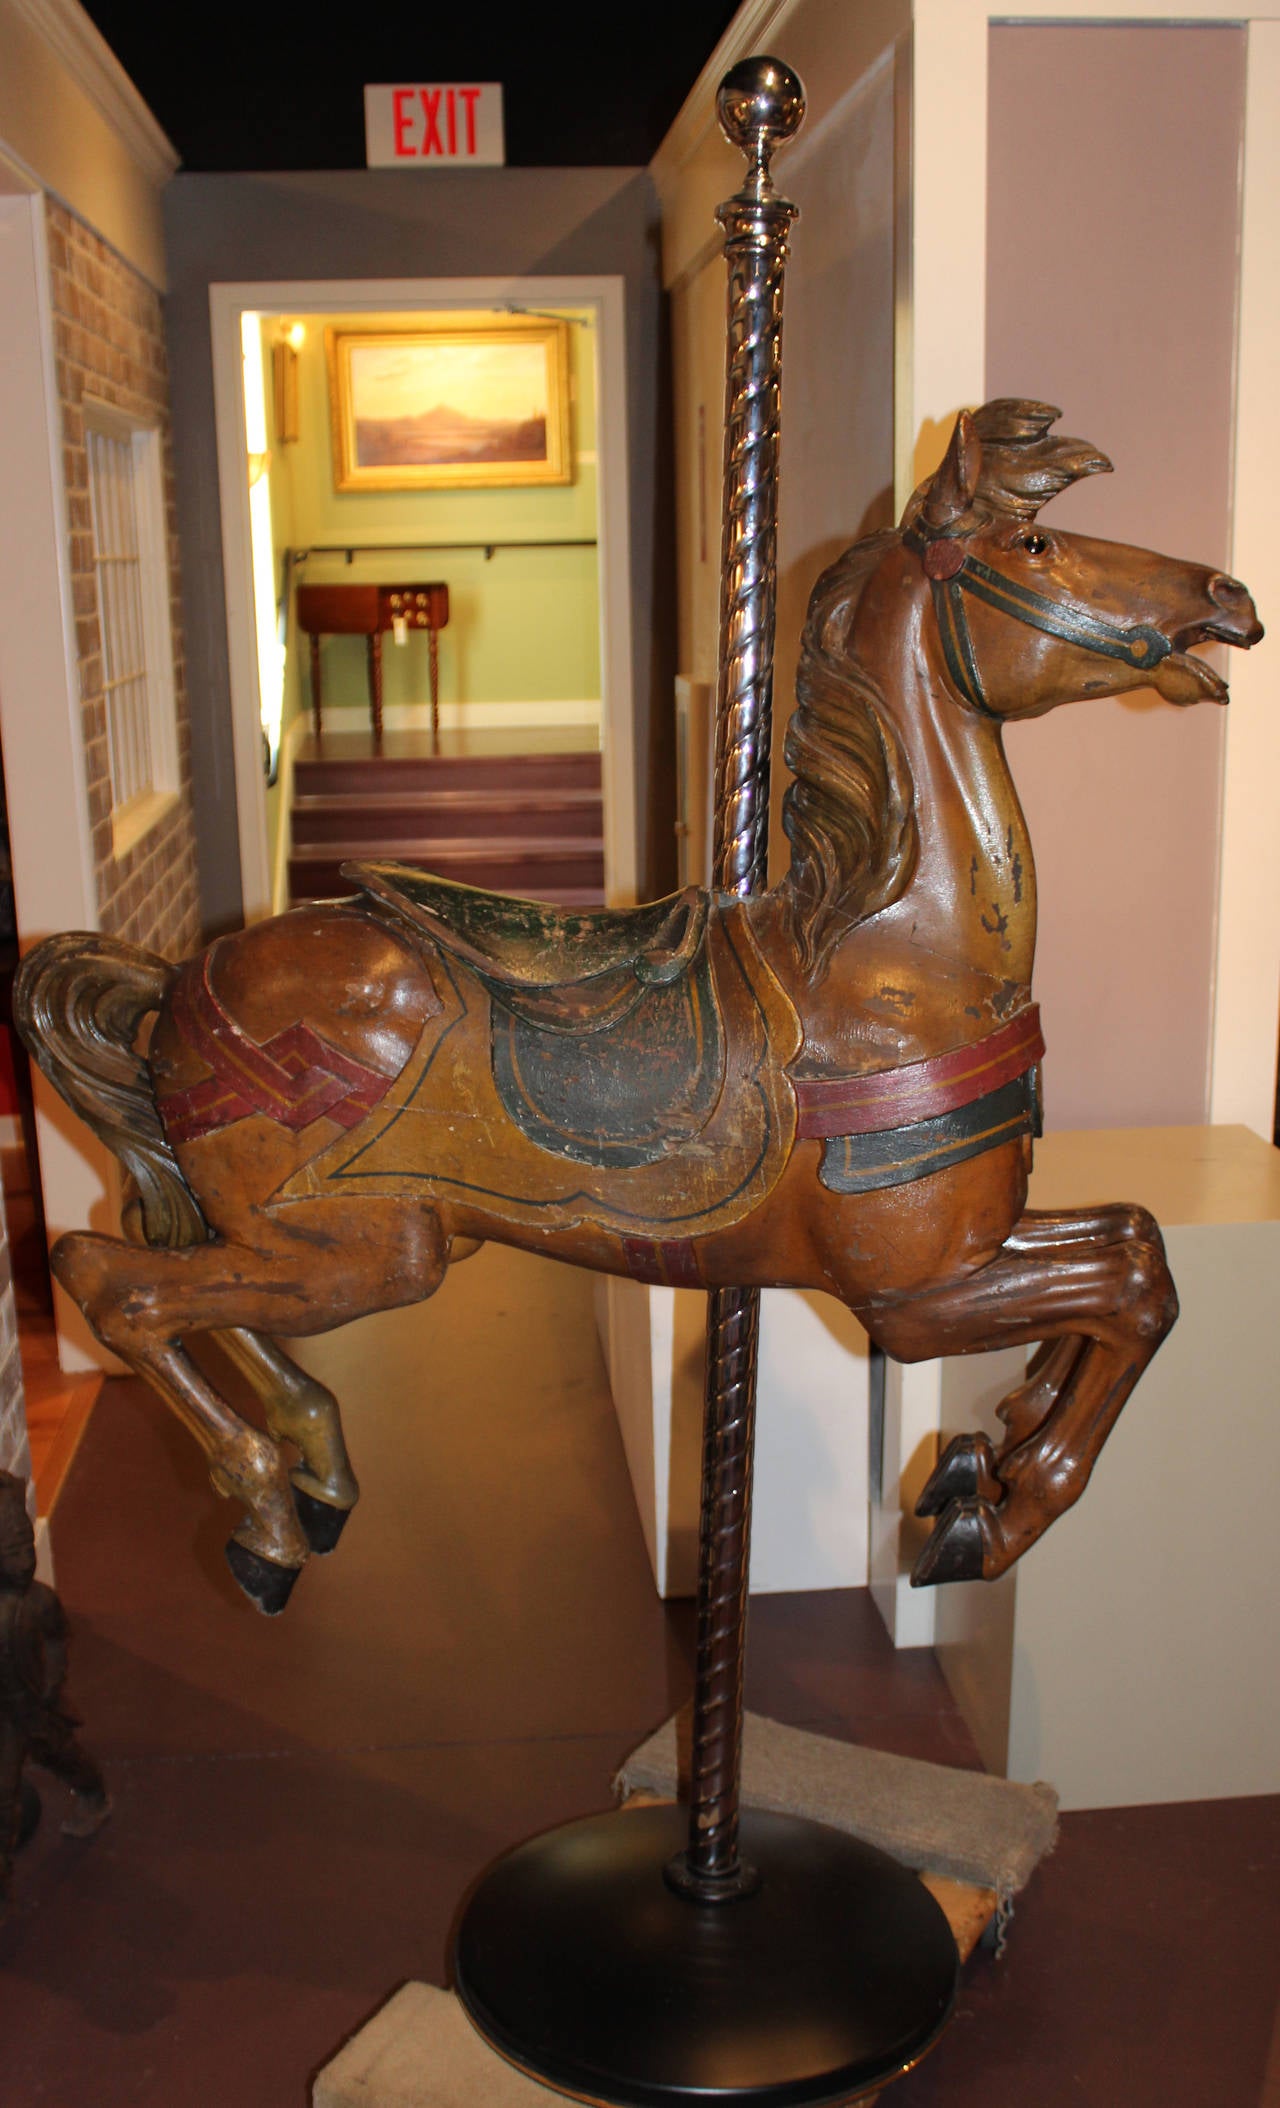 This carved and polychromed carousel horse is attributed to carver Daniel Charles Muller. Daniel began the D. C. Muller and Bro. Company in 1903 and after creating many magnificent carousels, closed its doors fourteen years later when materials